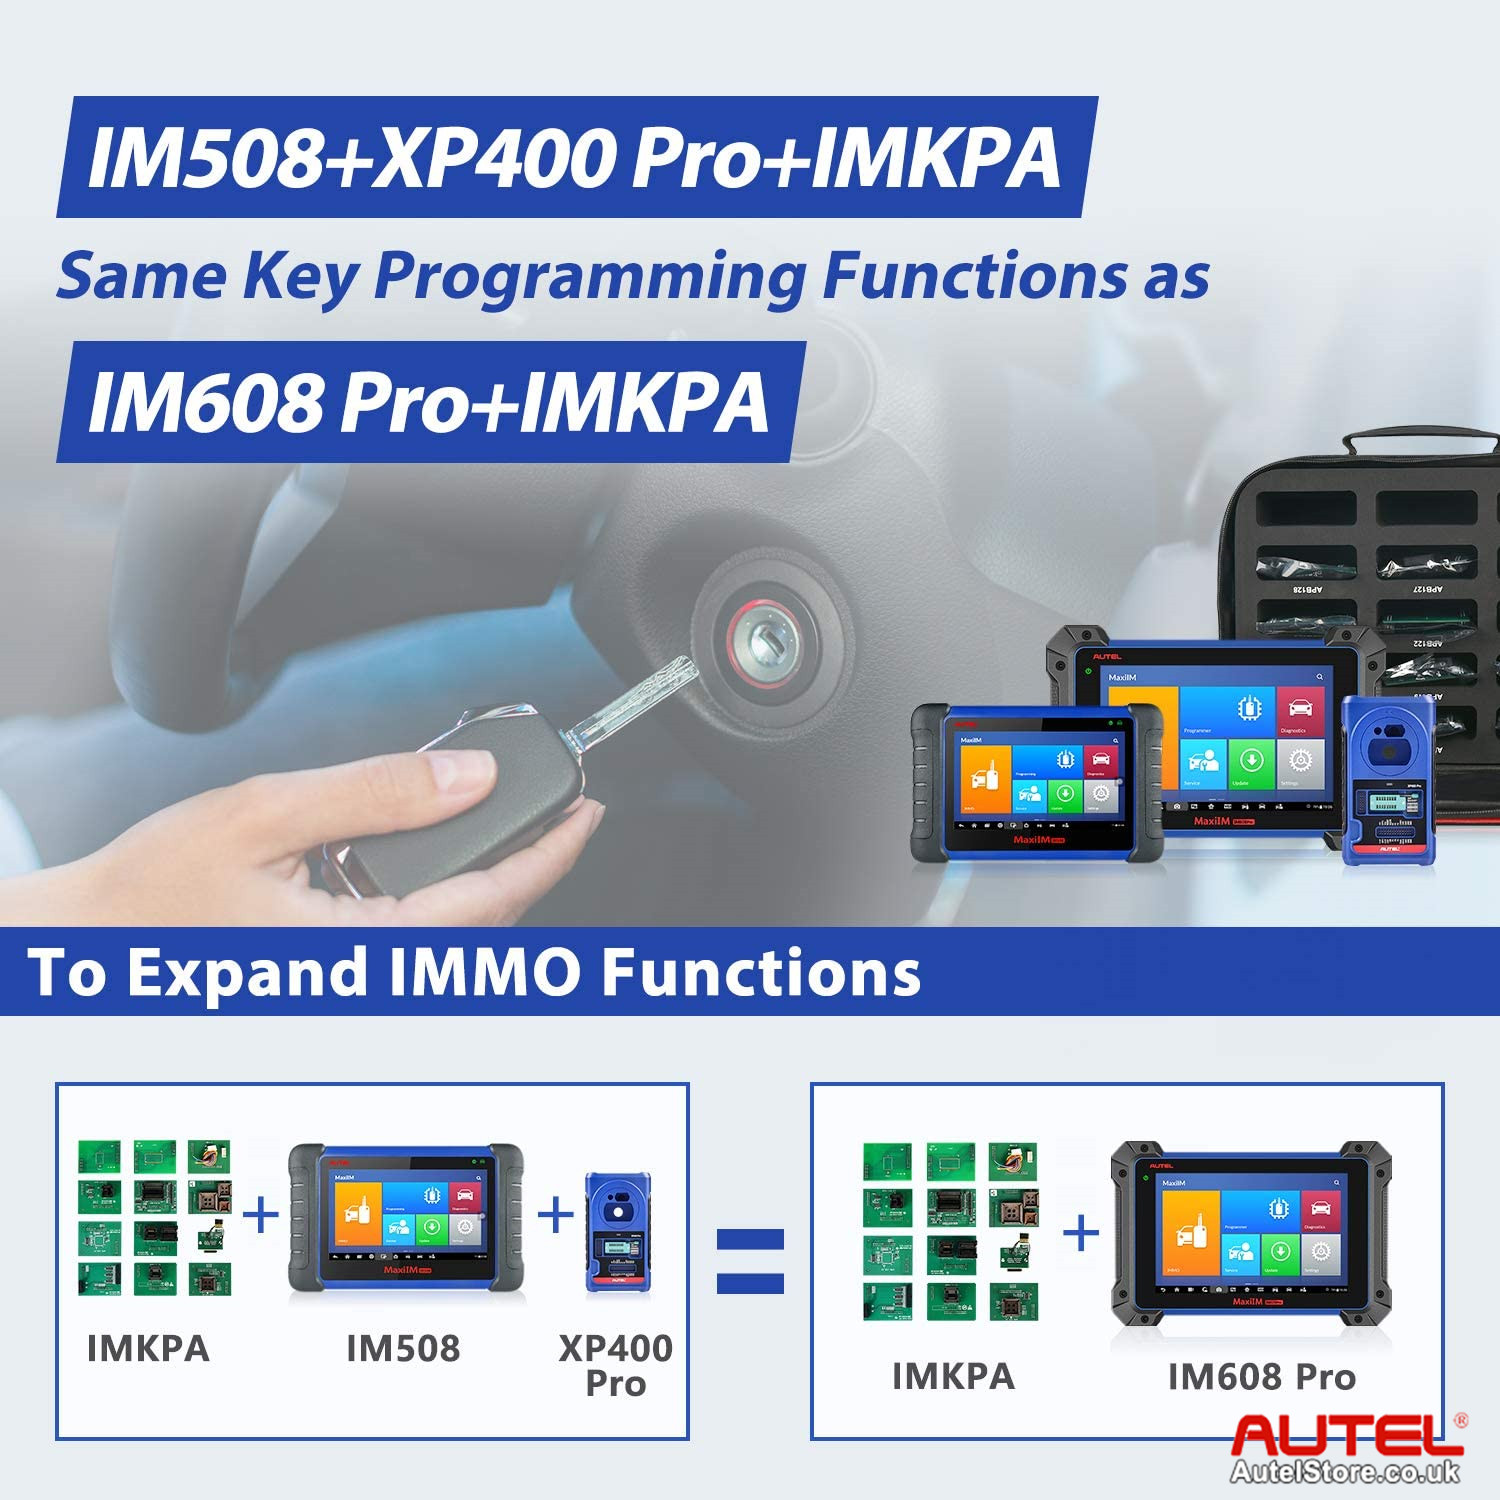 Autel IMKPA Expanded Key Programming Accessories